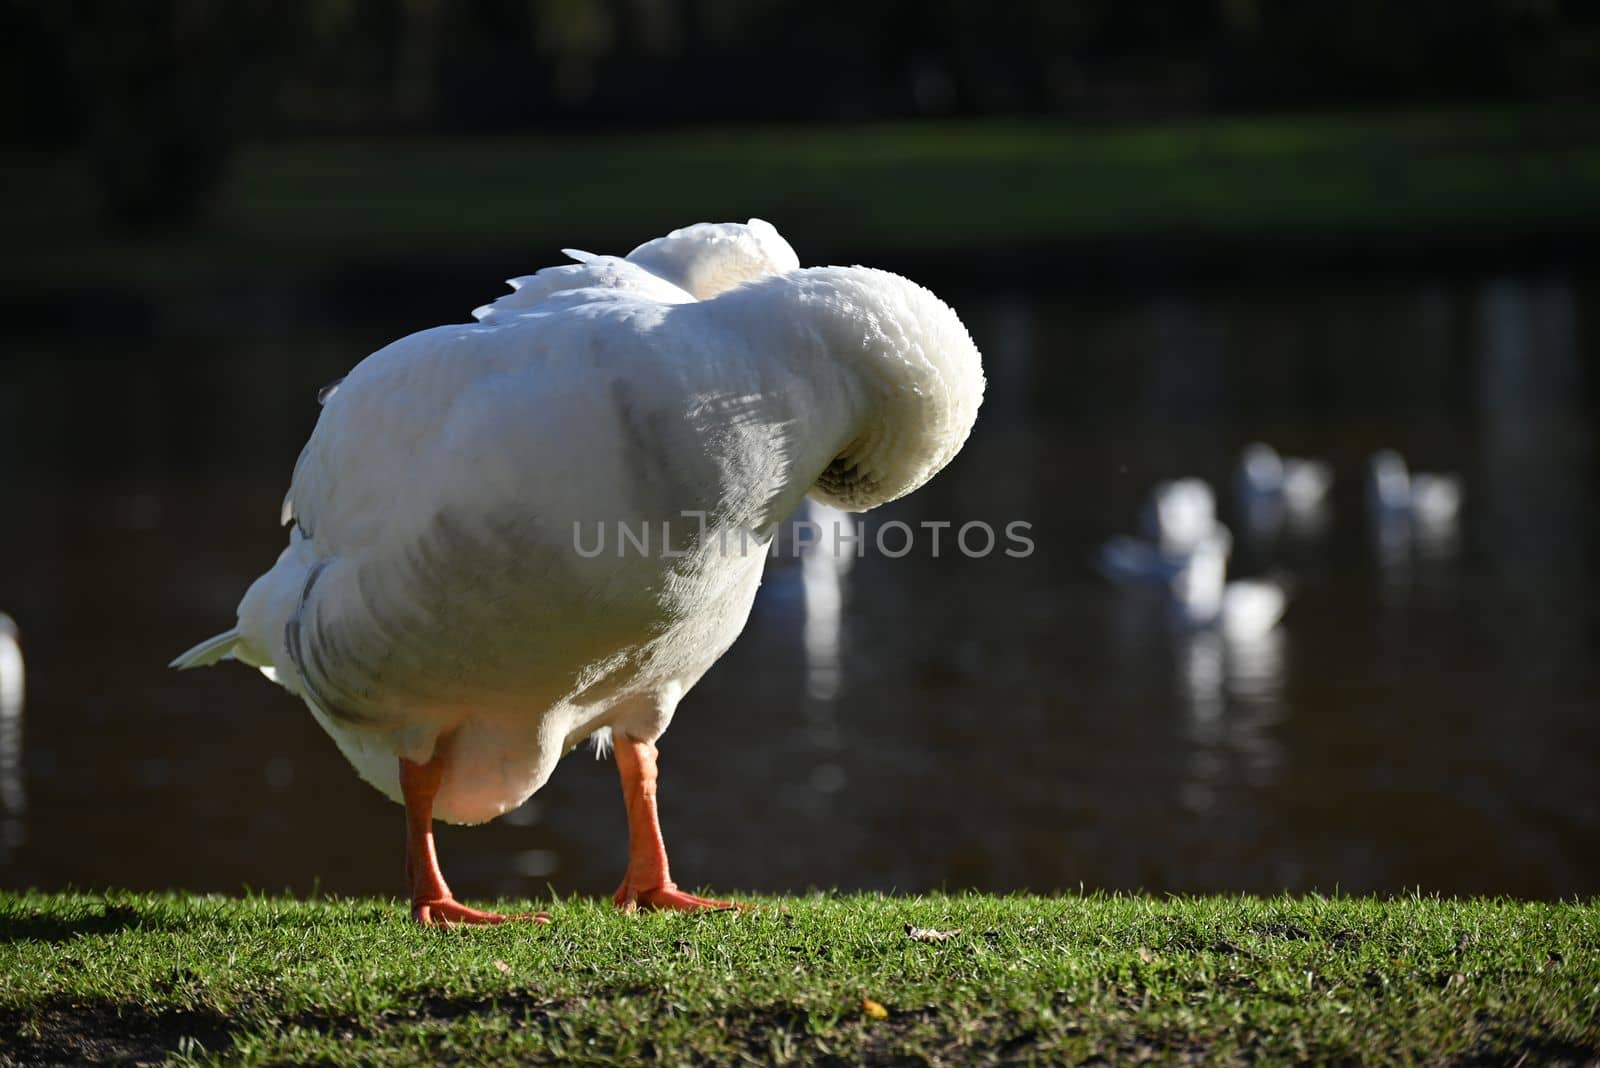 One white goose grooming her feathers in the park by Luise123